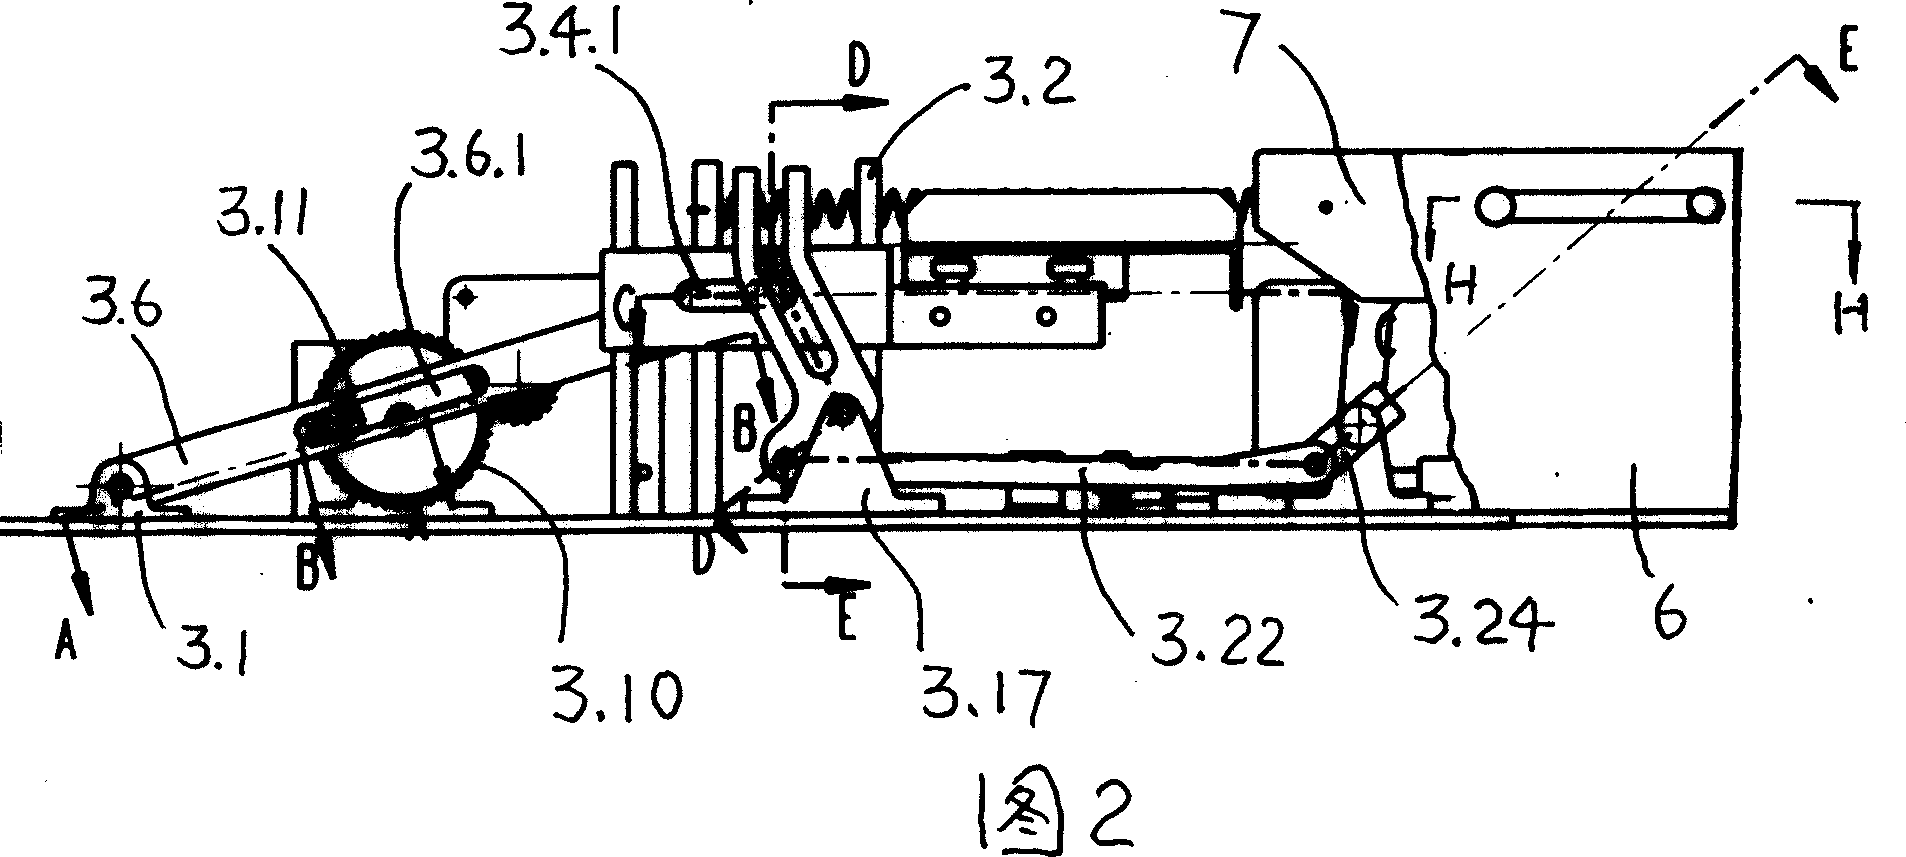 Cover-opening device for automatic playing card machine